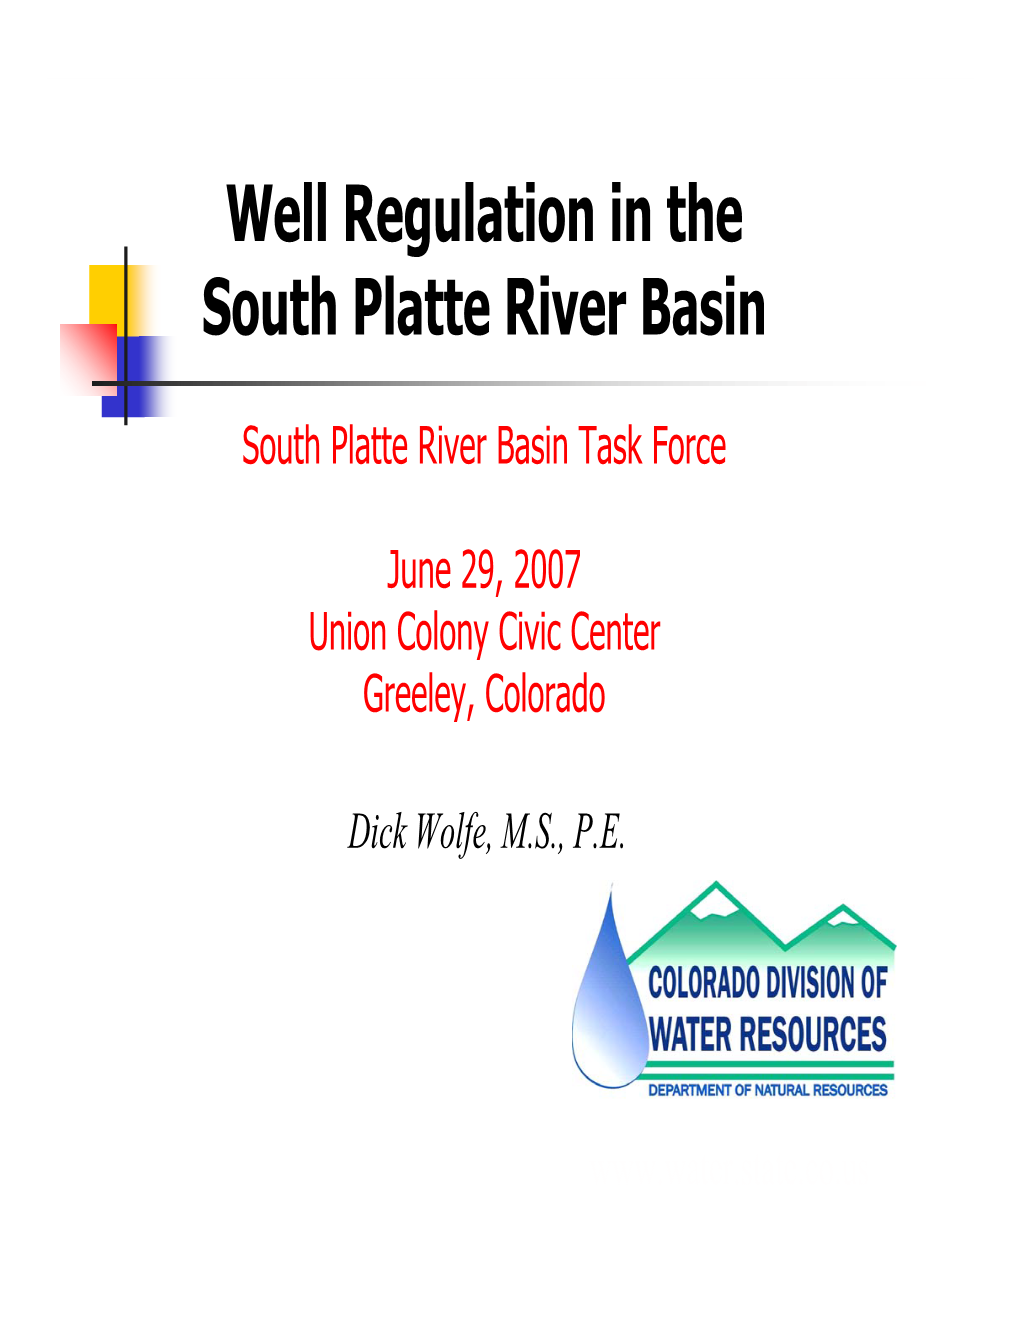 Well Regulation in the South Platte River Basin